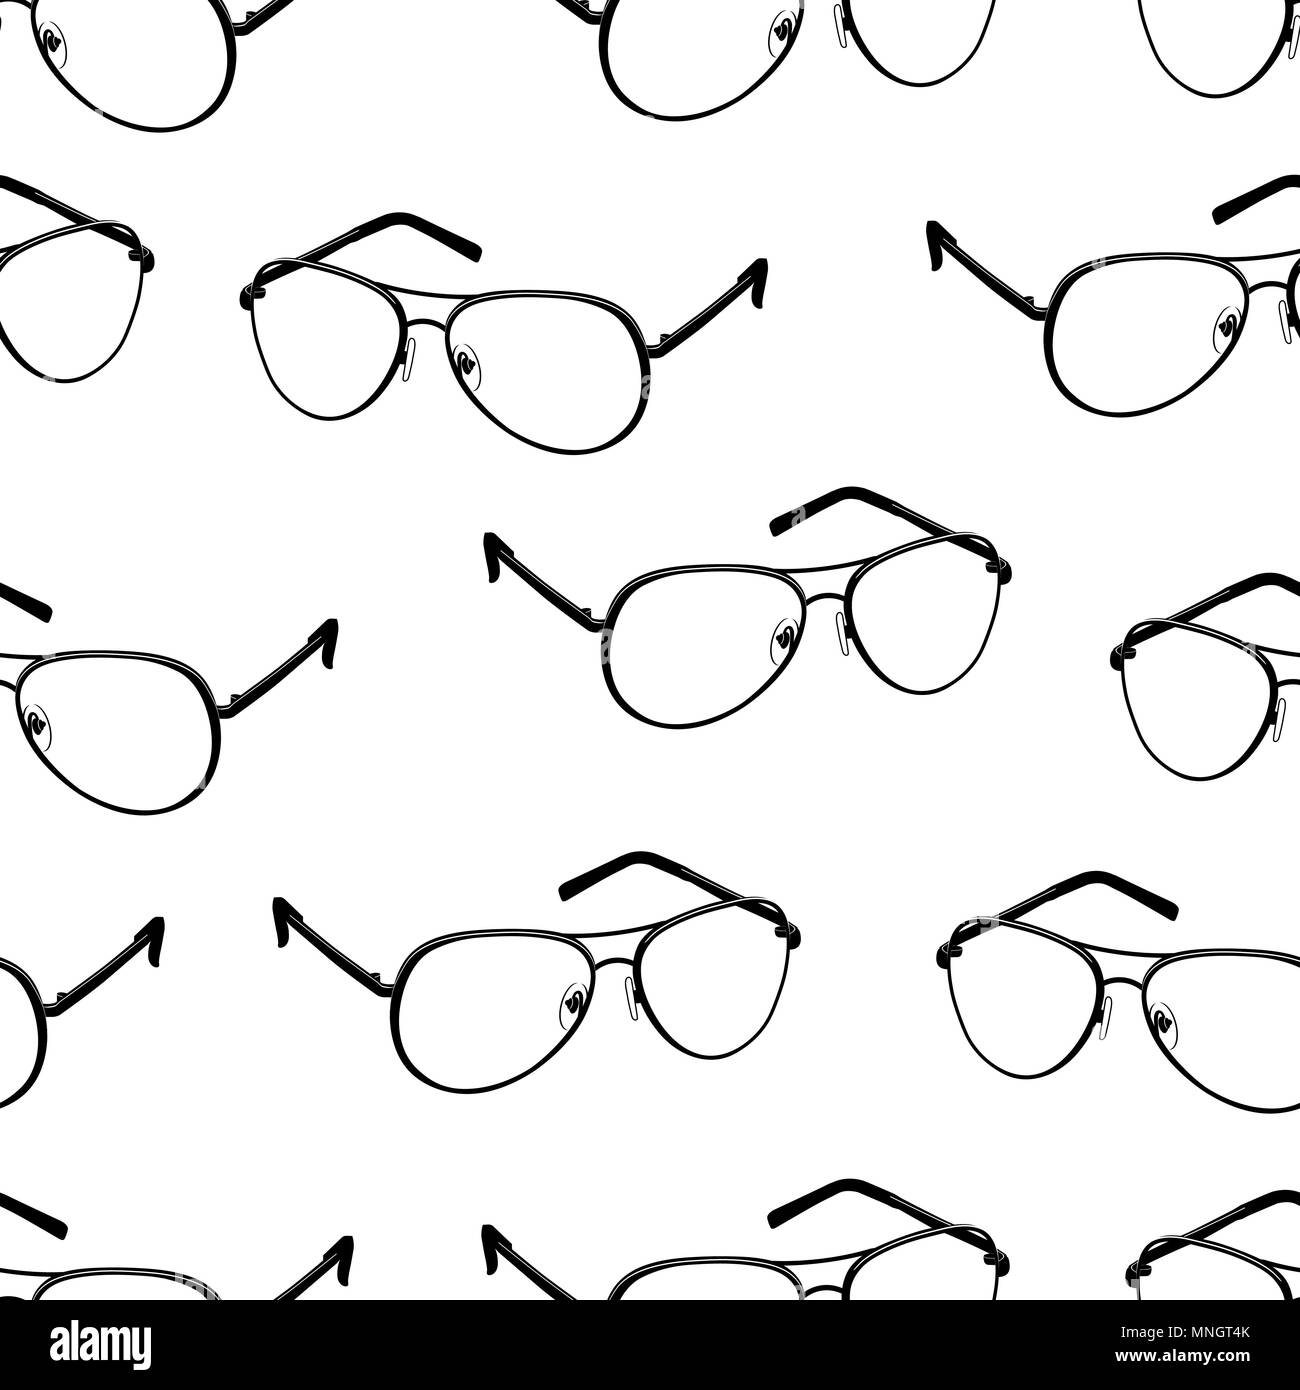 Glasses seamless pattern, monochrome vector background, black and white illustration. Outline contour drawing flat black spectacles on white background. For fabric design, wallpapers, print Stock Vector